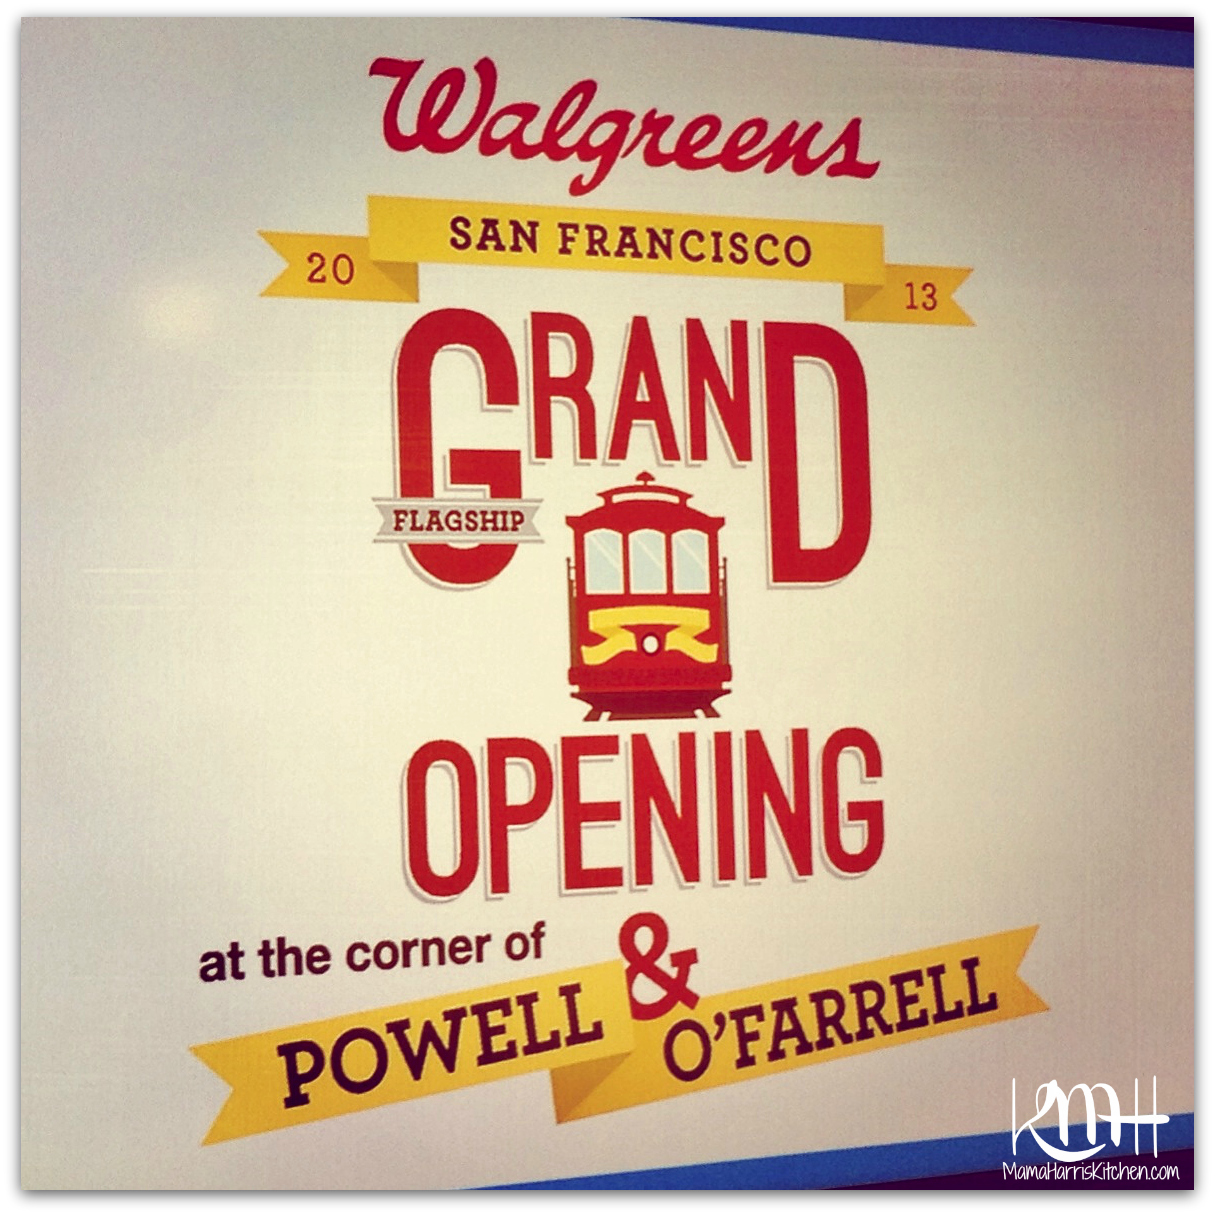 Come get to know the newest Flagship Walgreens store in San